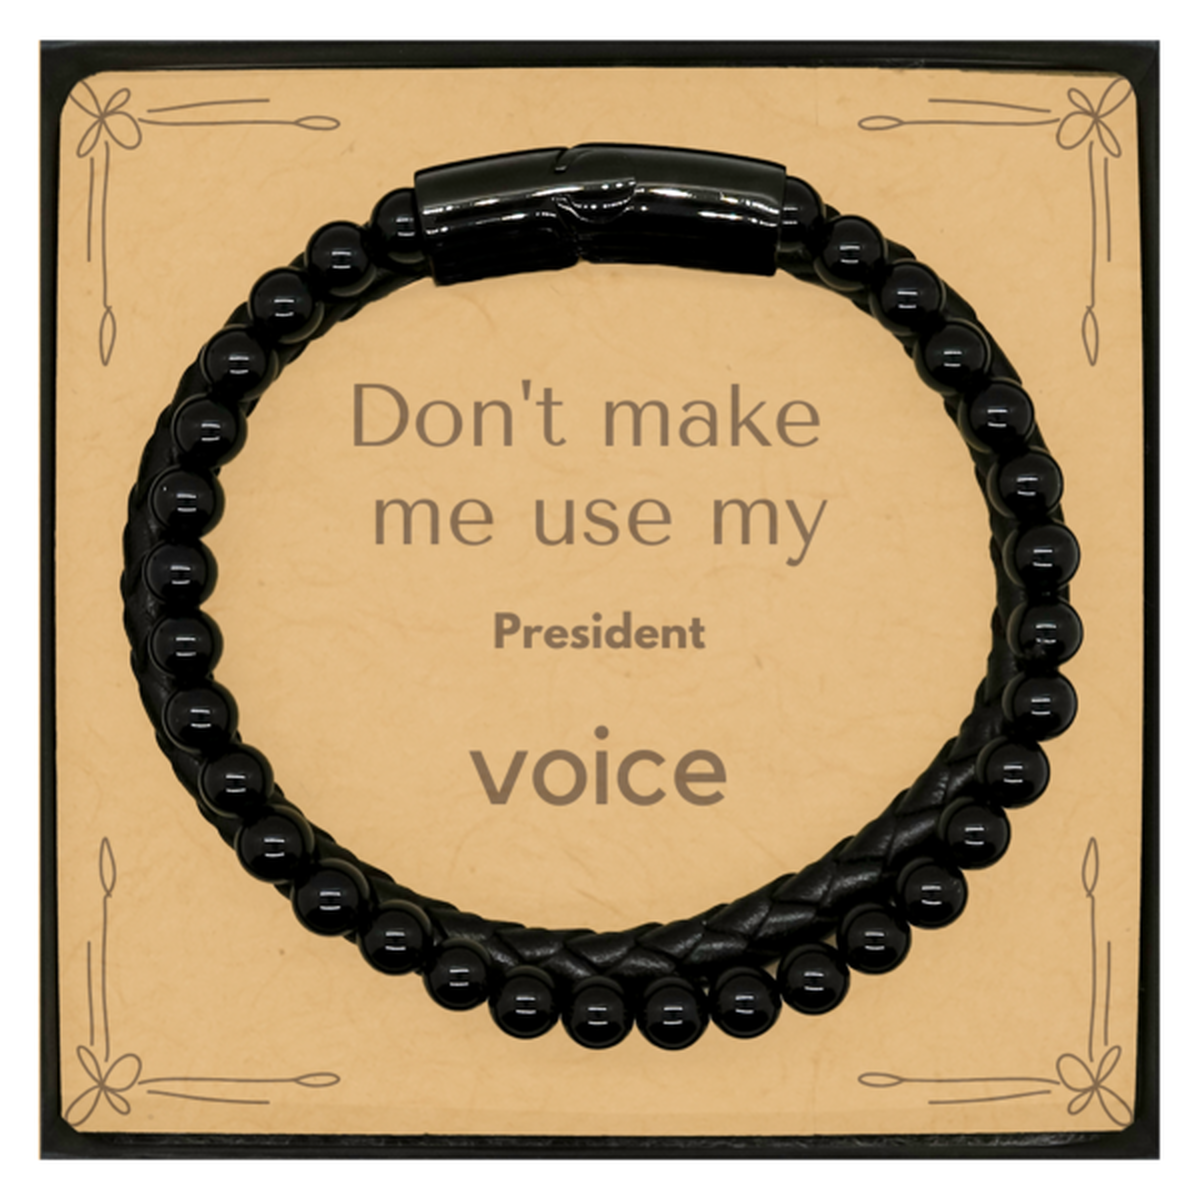 Don't make me use my President voice, Sarcasm President Card Gifts, Christmas President Stone Leather Bracelets Birthday Unique Gifts For President Coworkers, Men, Women, Colleague, Friends